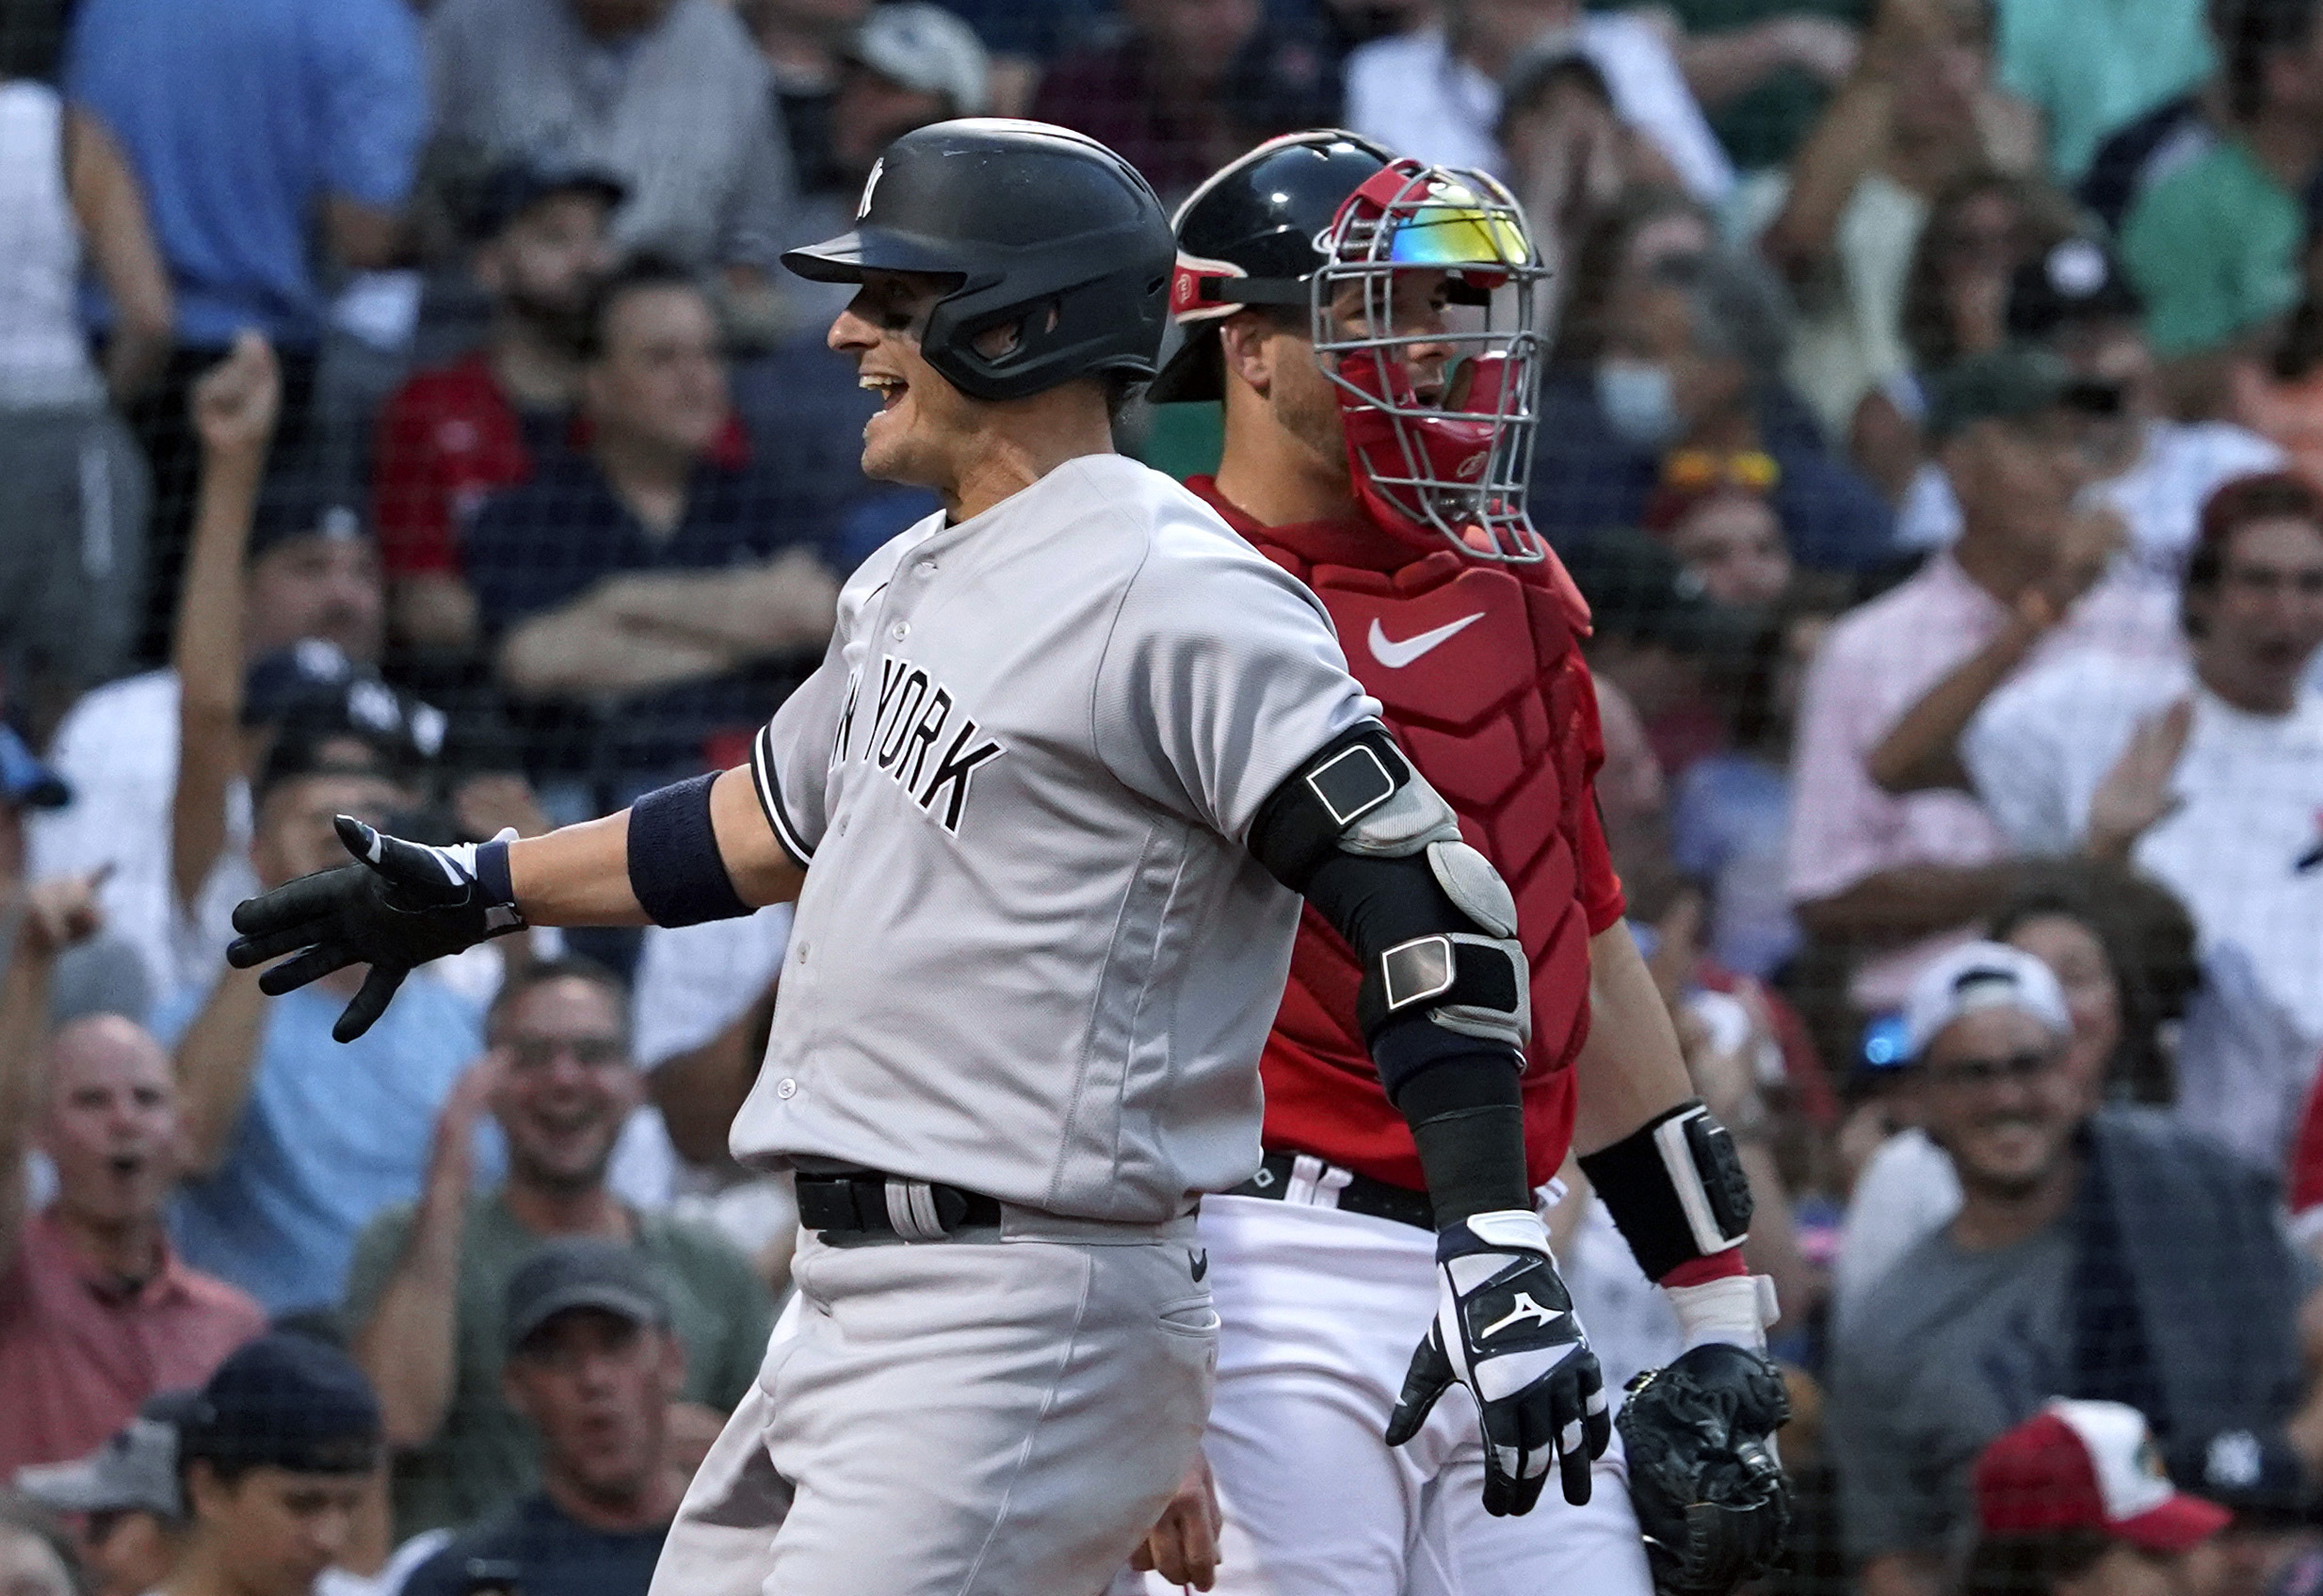 Yankees Pull Even With the Red Sox as Stanton Leads the Way - The